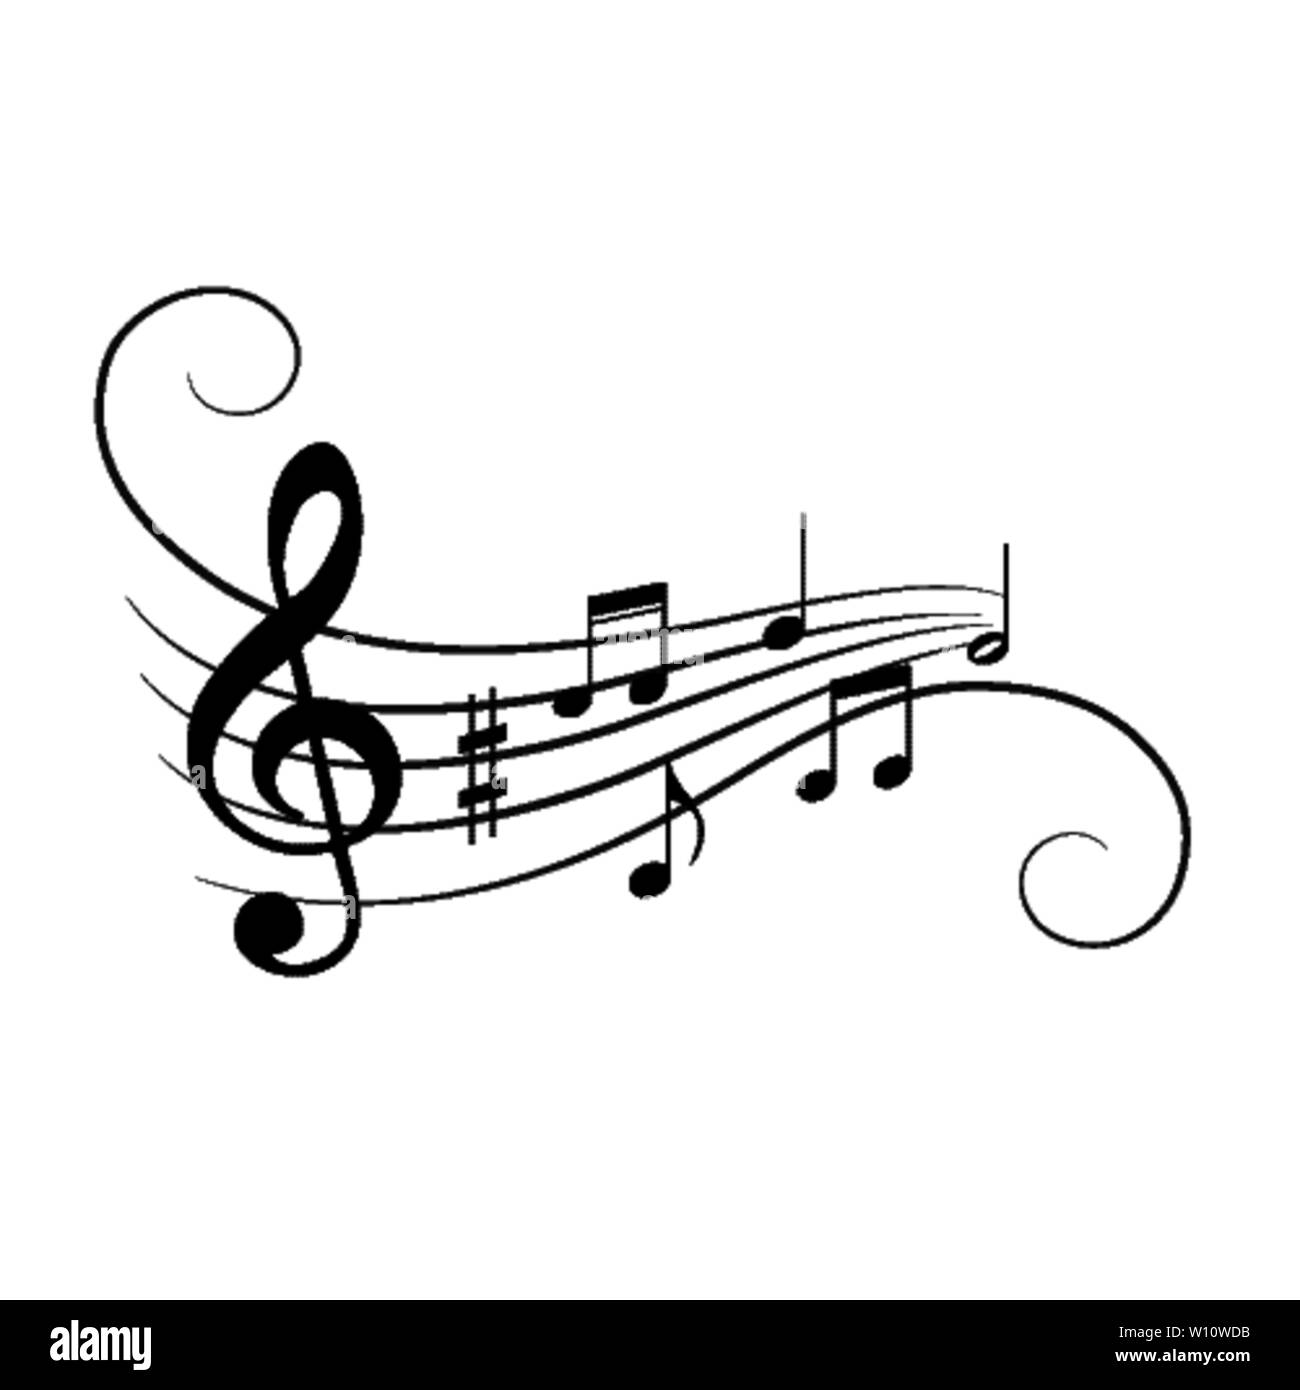 Abstract music background with musical notes Stock Vector